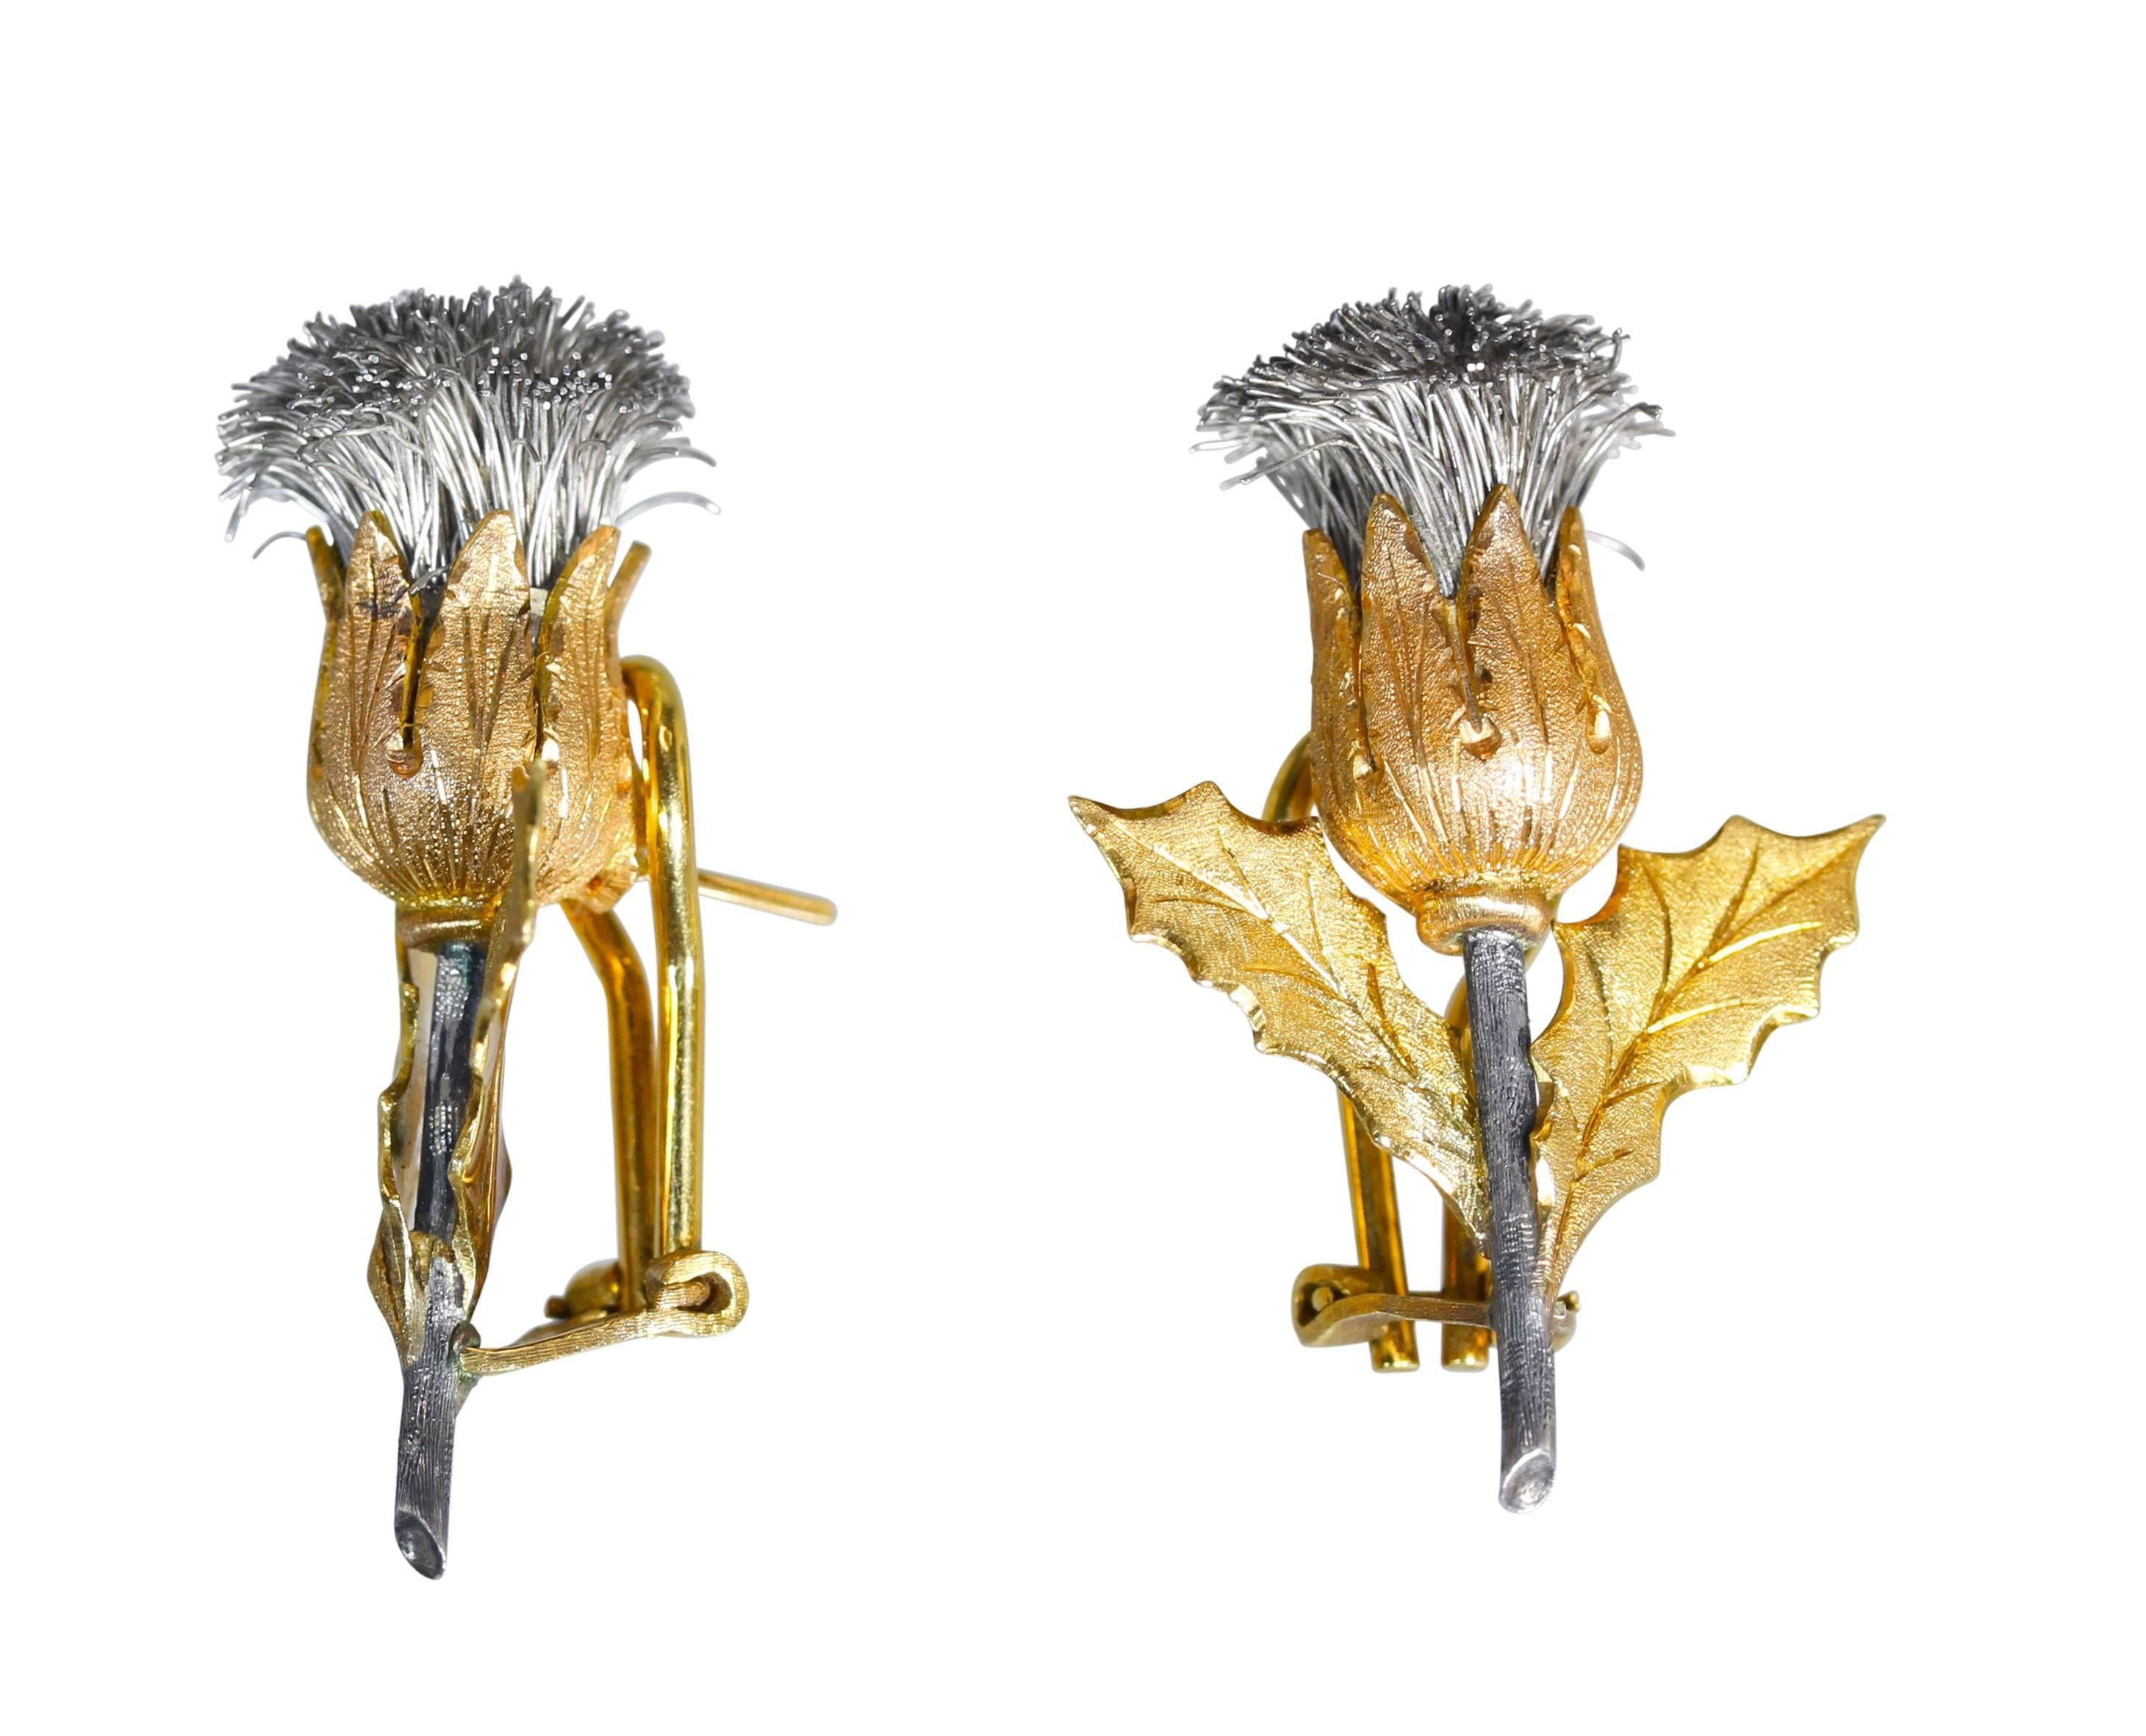 A pair of 18 karat gold and silver 'Thistle' earclips by Buccellati, Italy, designed as textured gold thistles of silver and yellow gold, measuring 1 3/8 by 1 inches, gross weight 15.8 grams, signed Gianmaria Buccellati, Italy, with indistinct